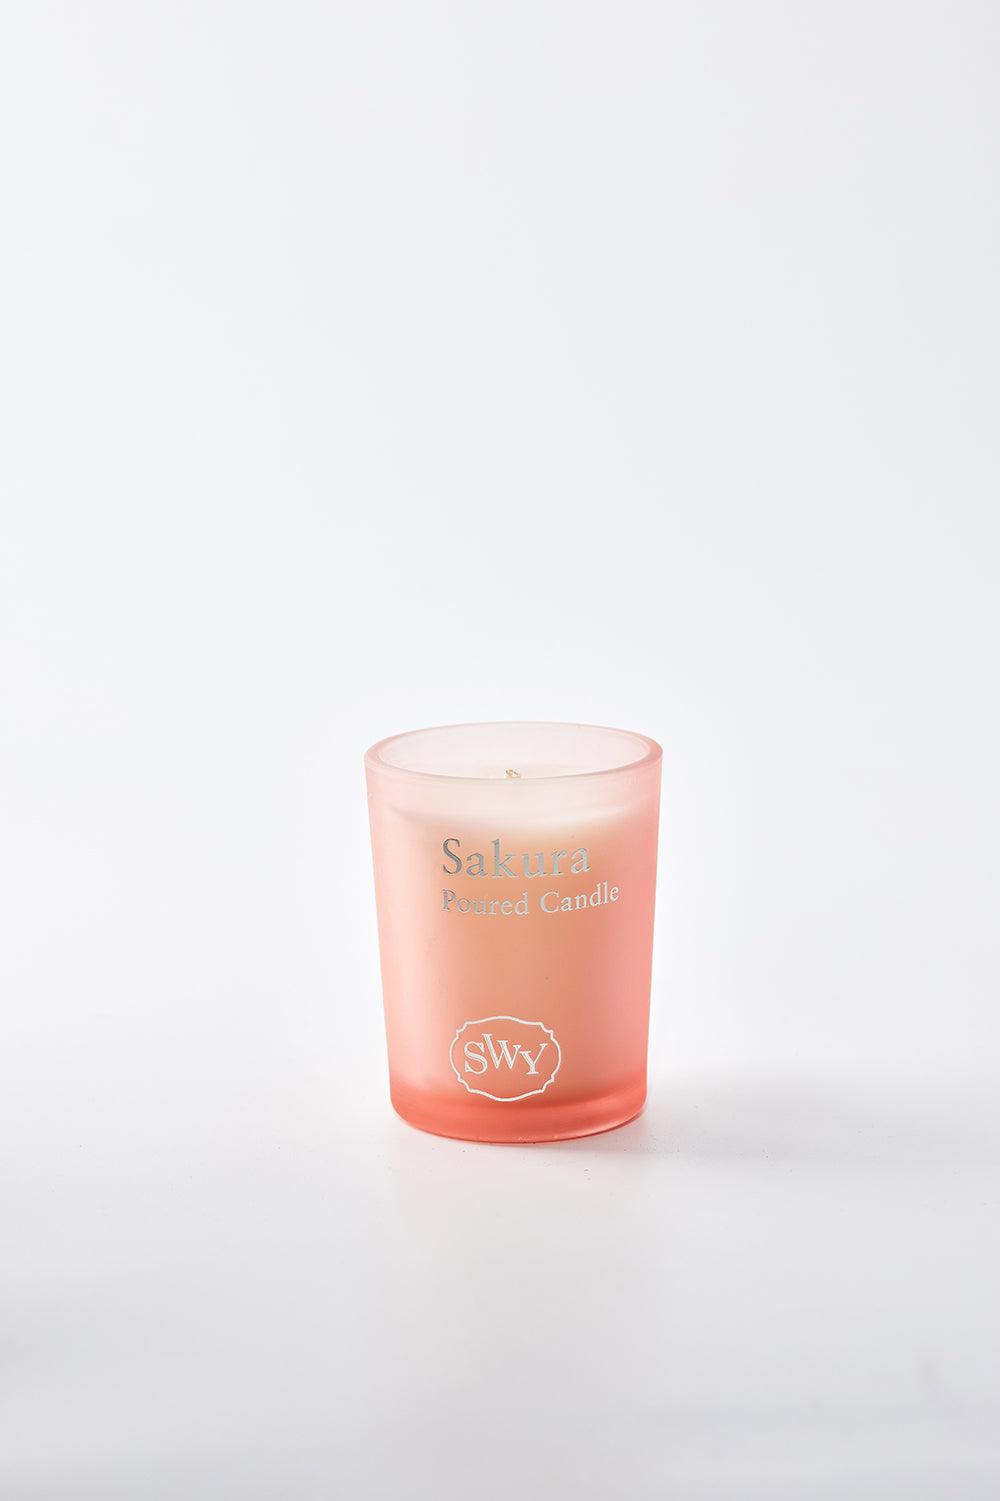 Poured Candle – Sakura - SWY - Scent With You